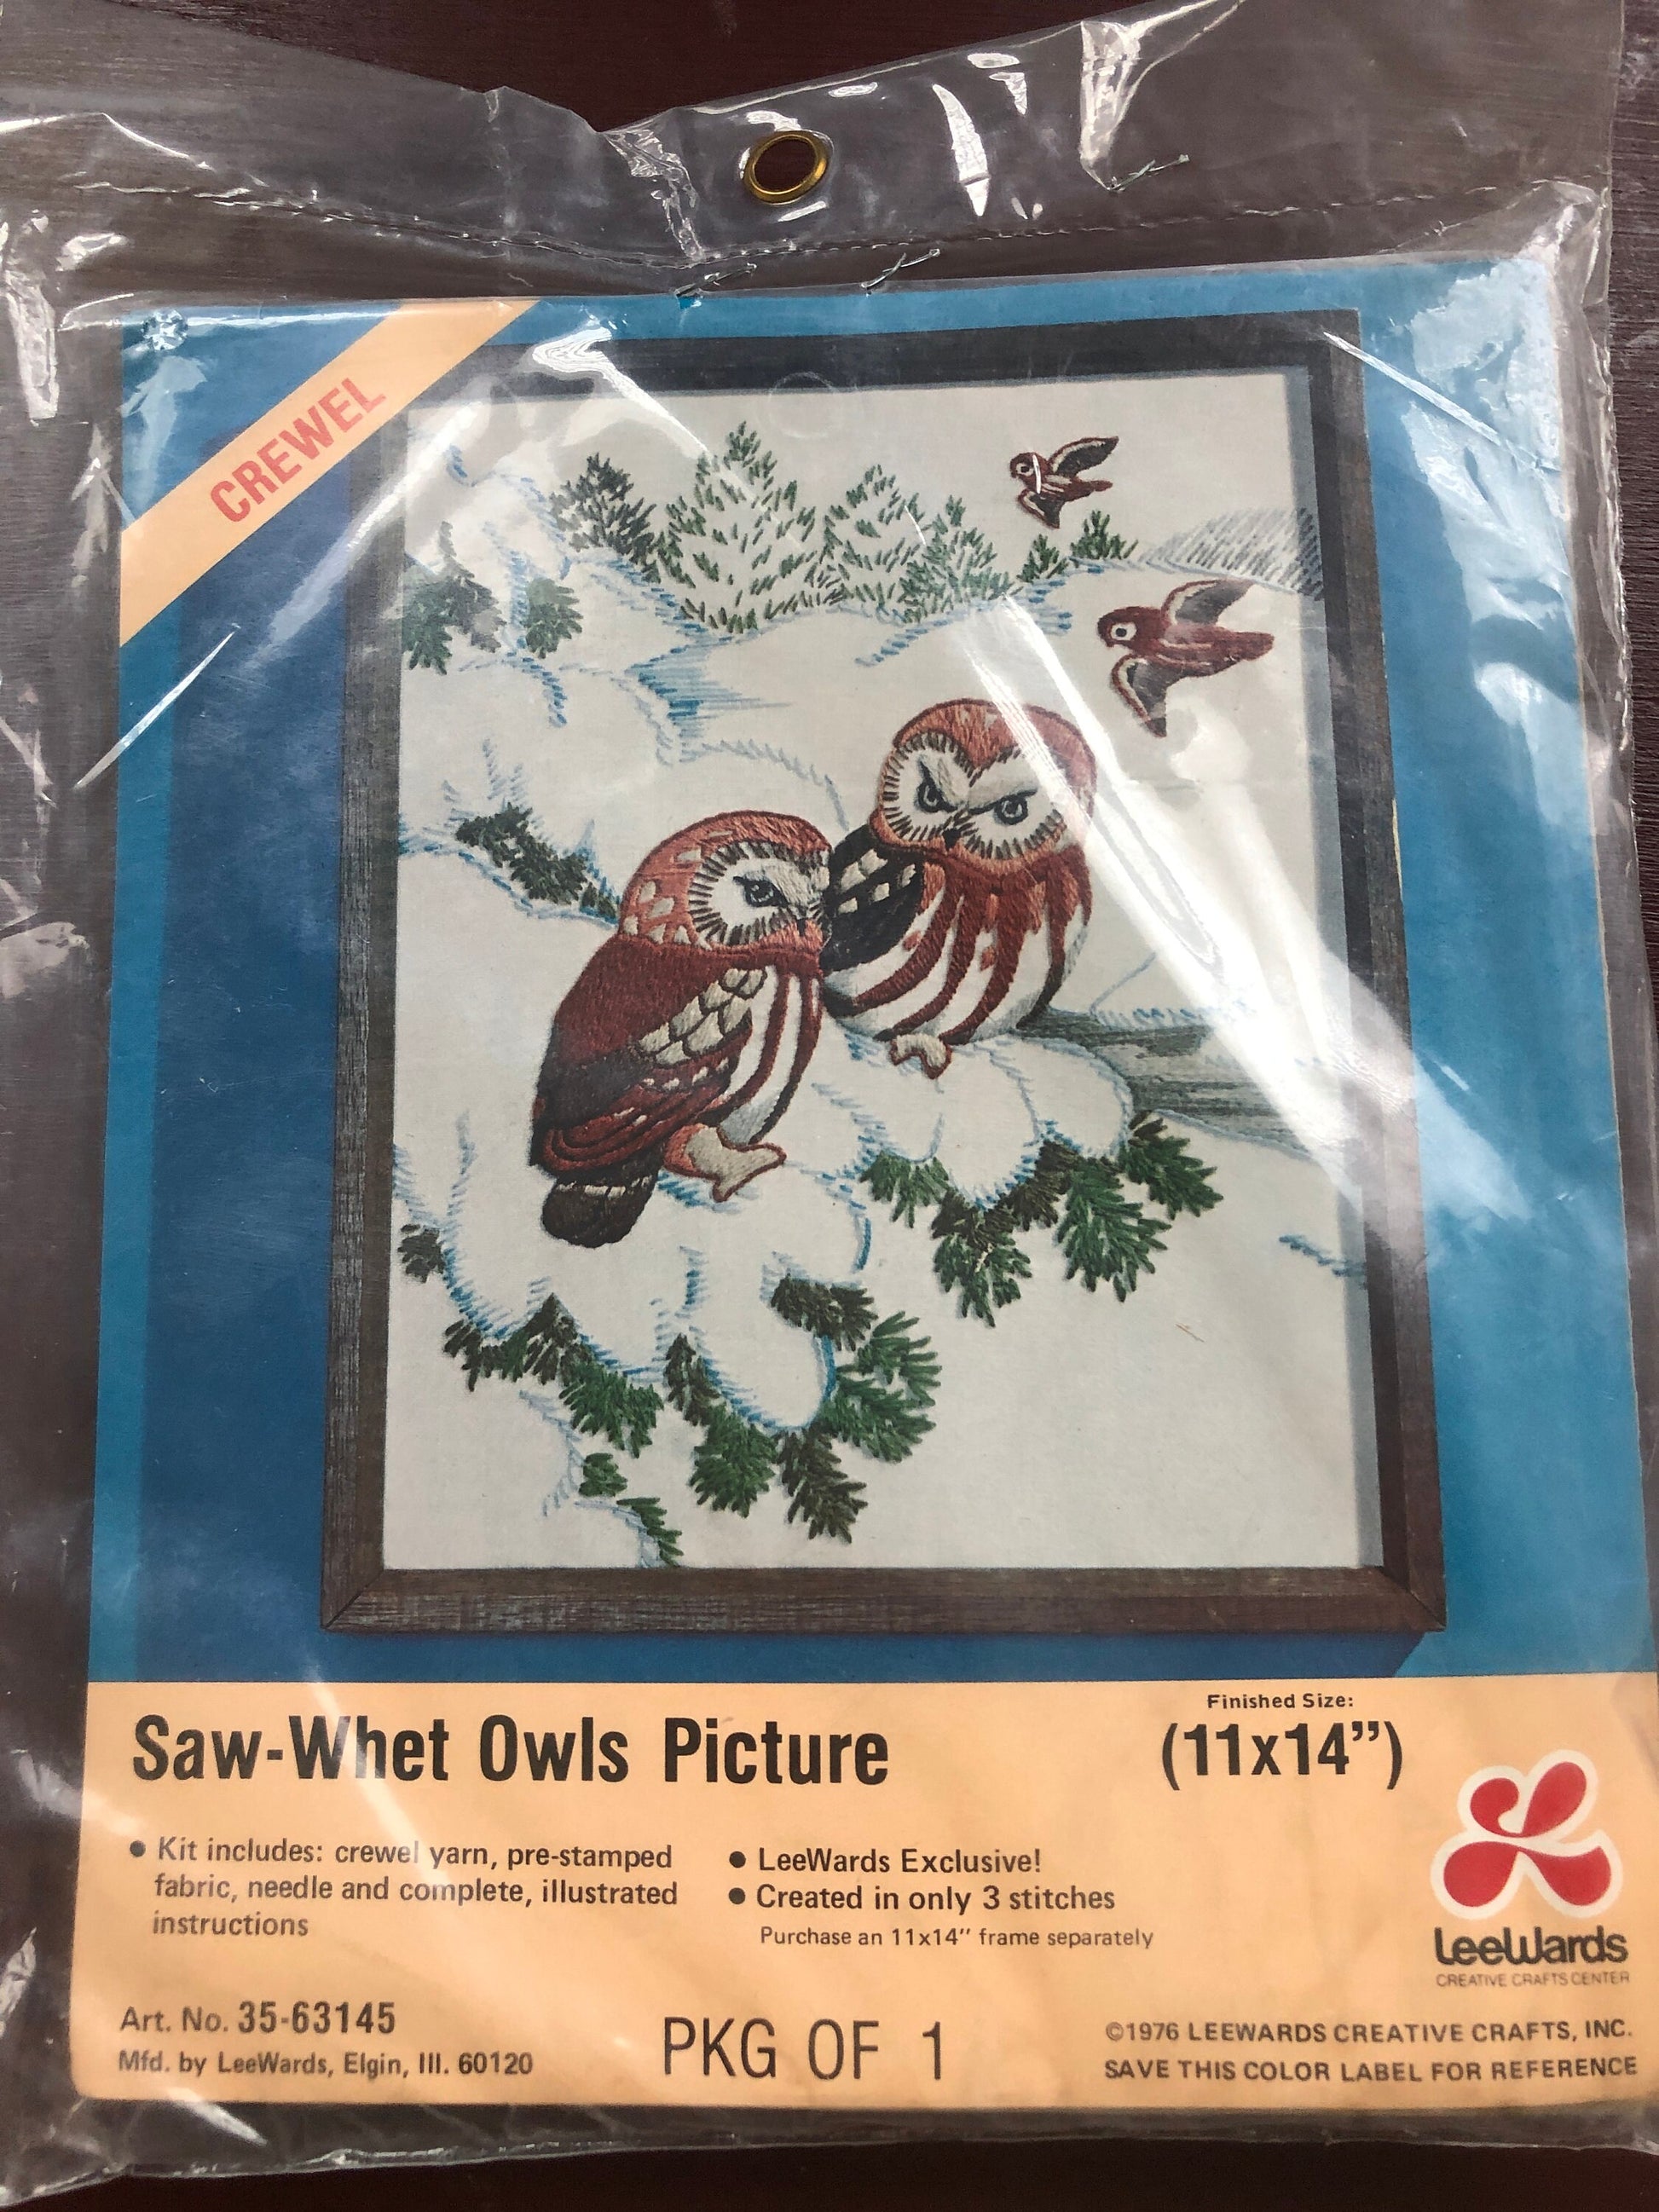 LeeWards Saw-Whet Owls Picture Vintage 1976 Crewel Kit 11 by 14 Inches Very Hard To Find